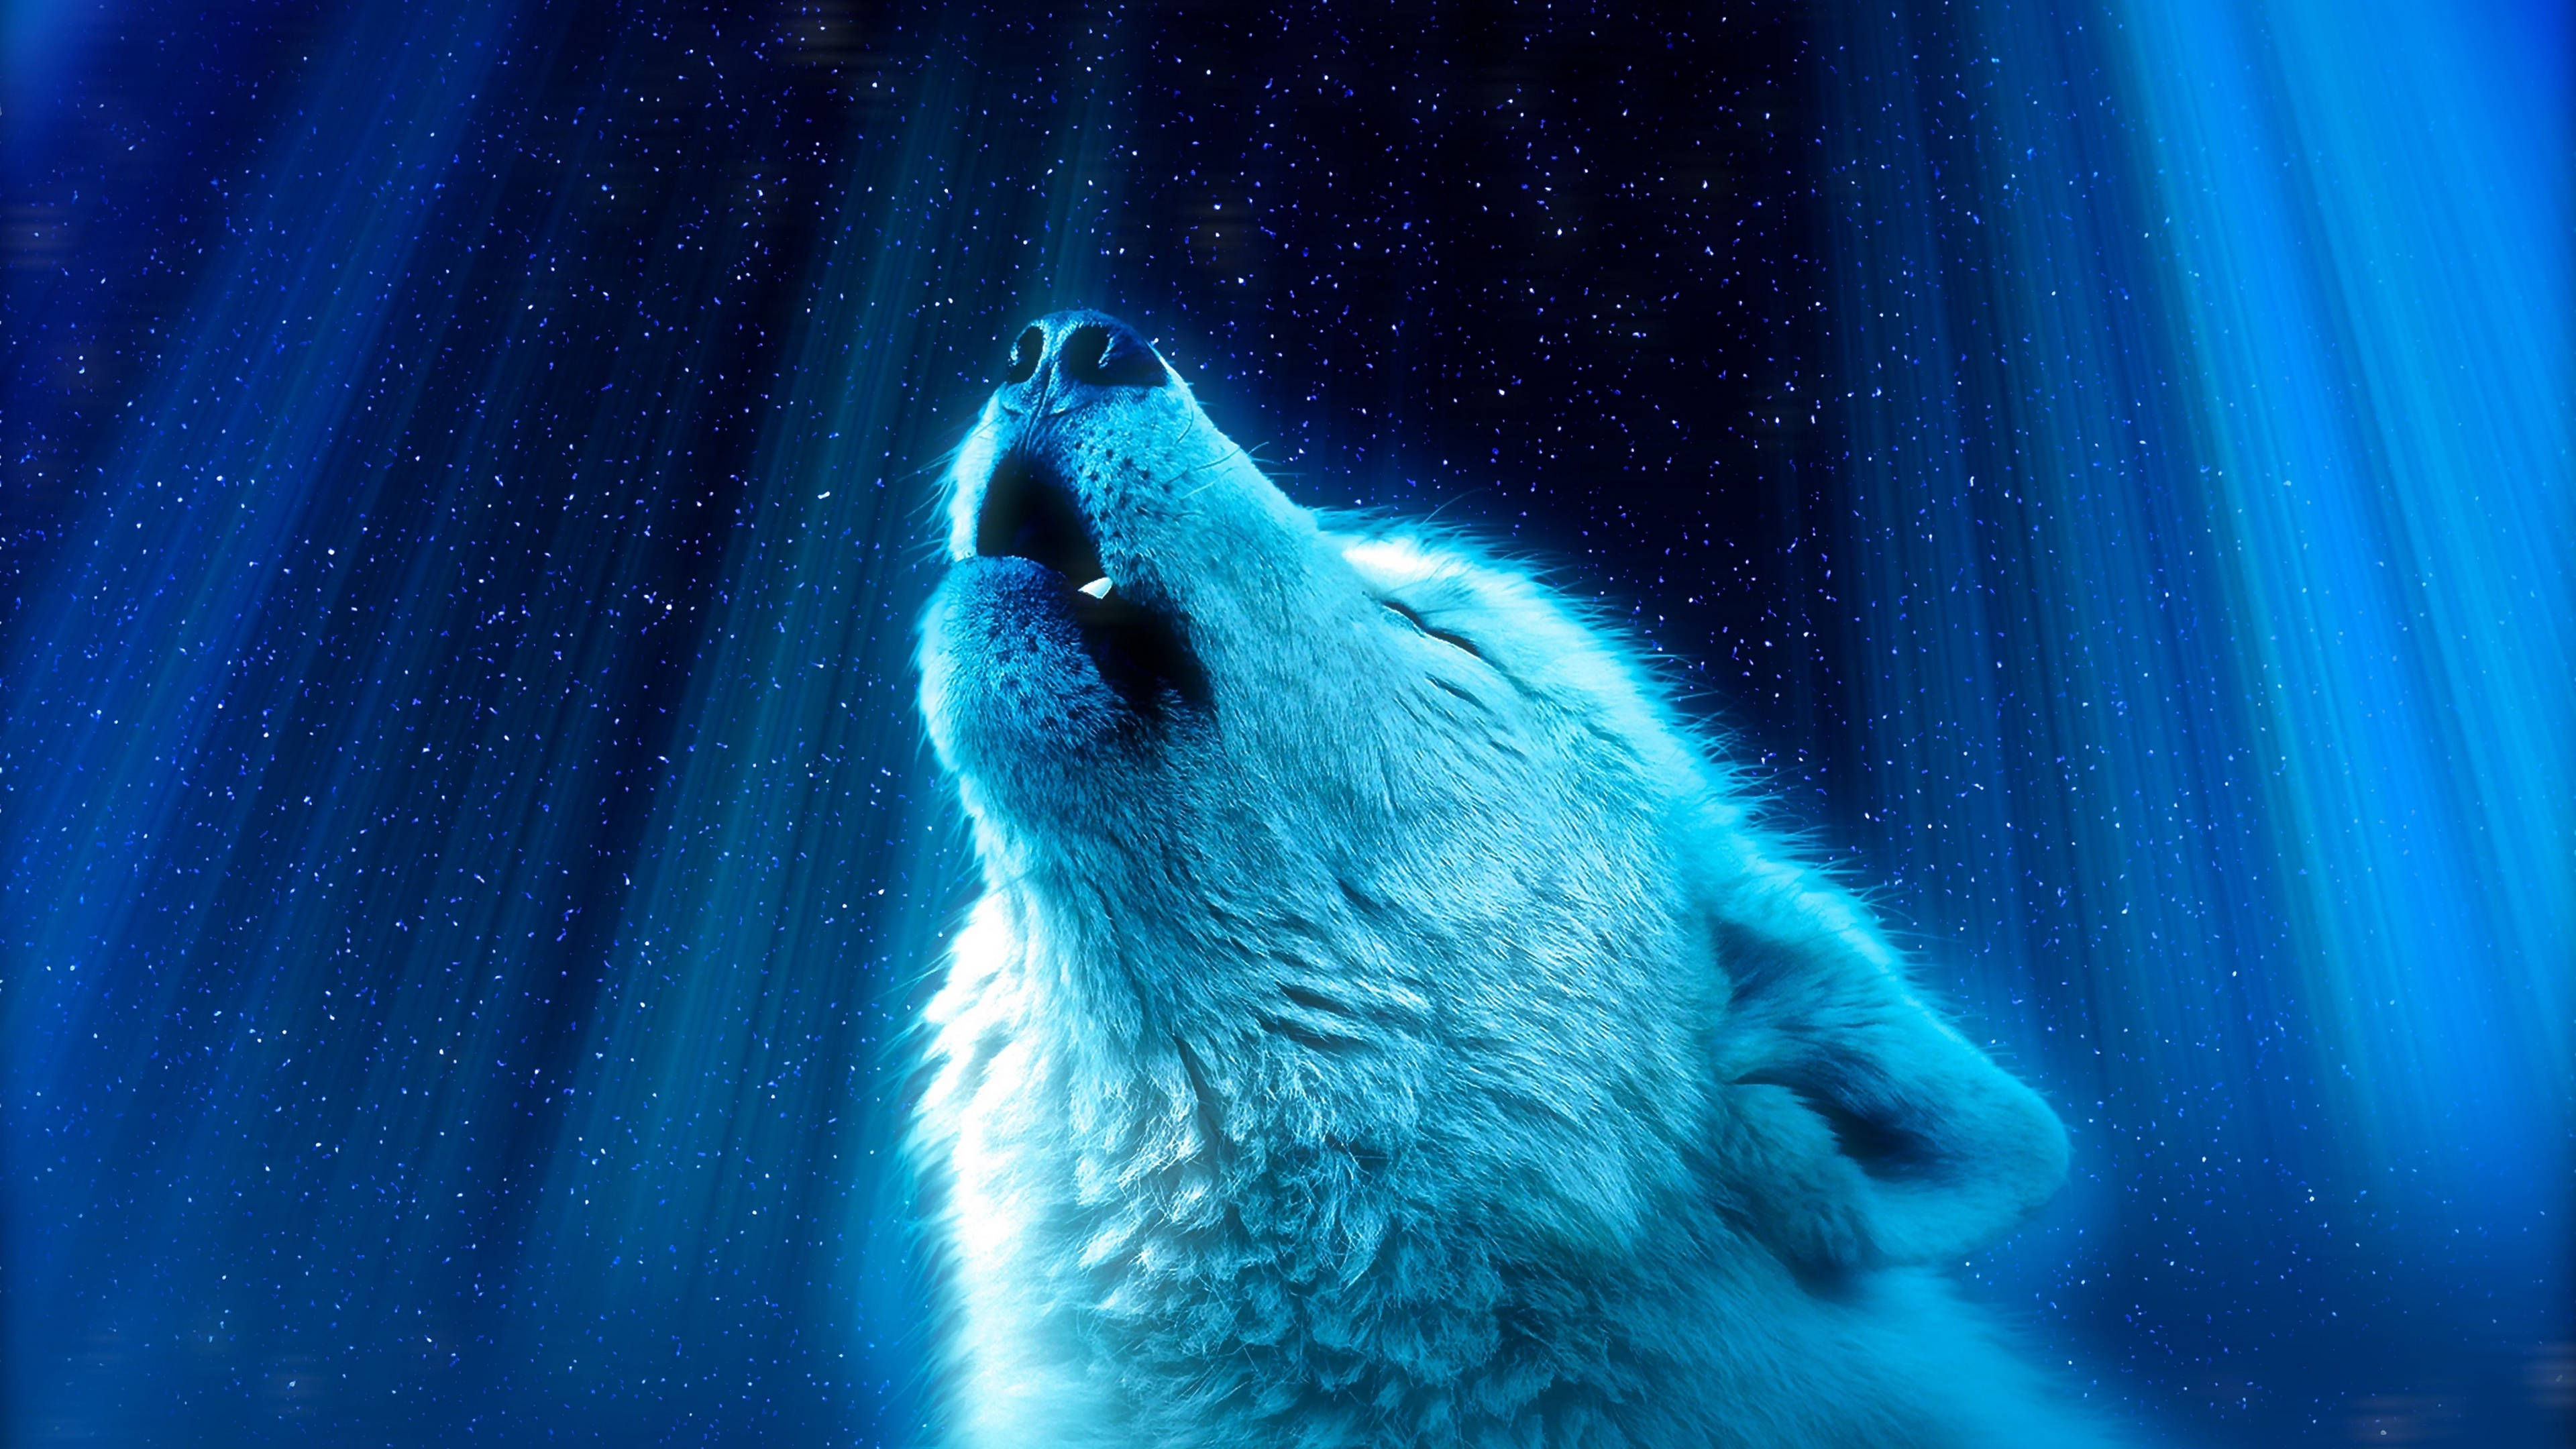 Cool Starry Galaxy Night Howling Wolf Background